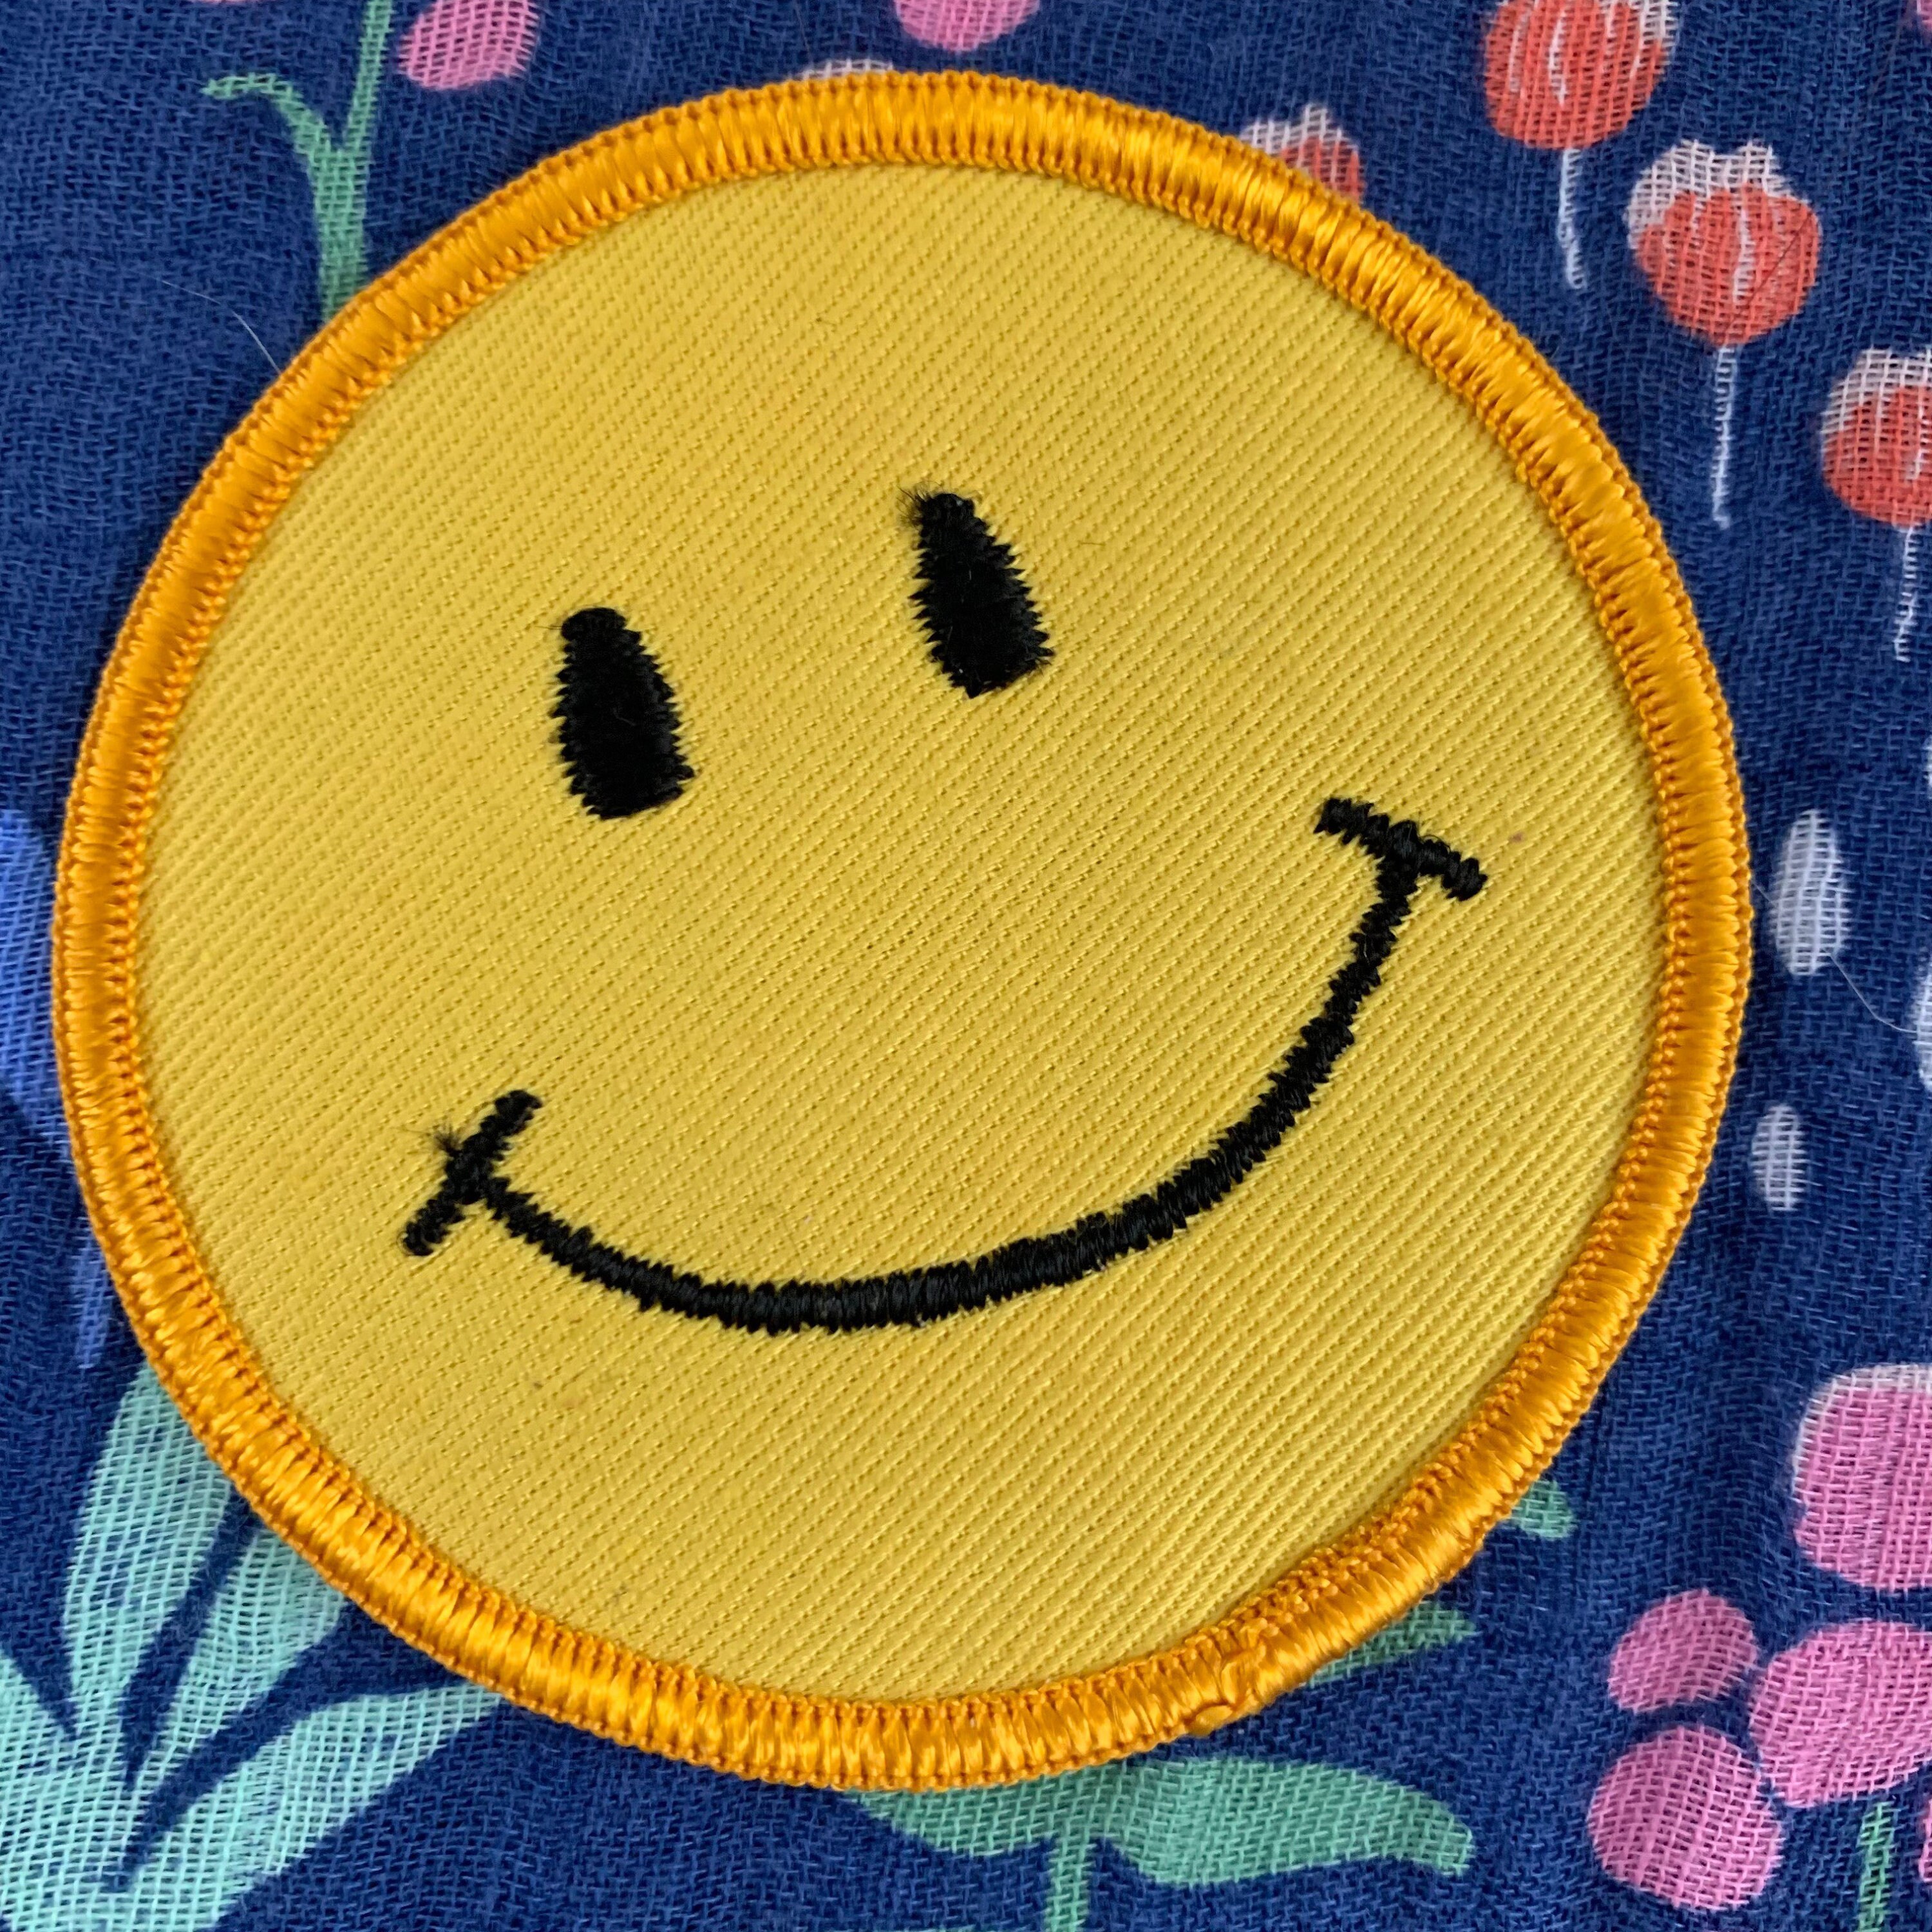 Cute Yellow Smile Face Embroidery Patch Iron On For Clothes, Hat Patches,  Backpacks, DIY Crafts From Moomoo2016_clothes, $0.28